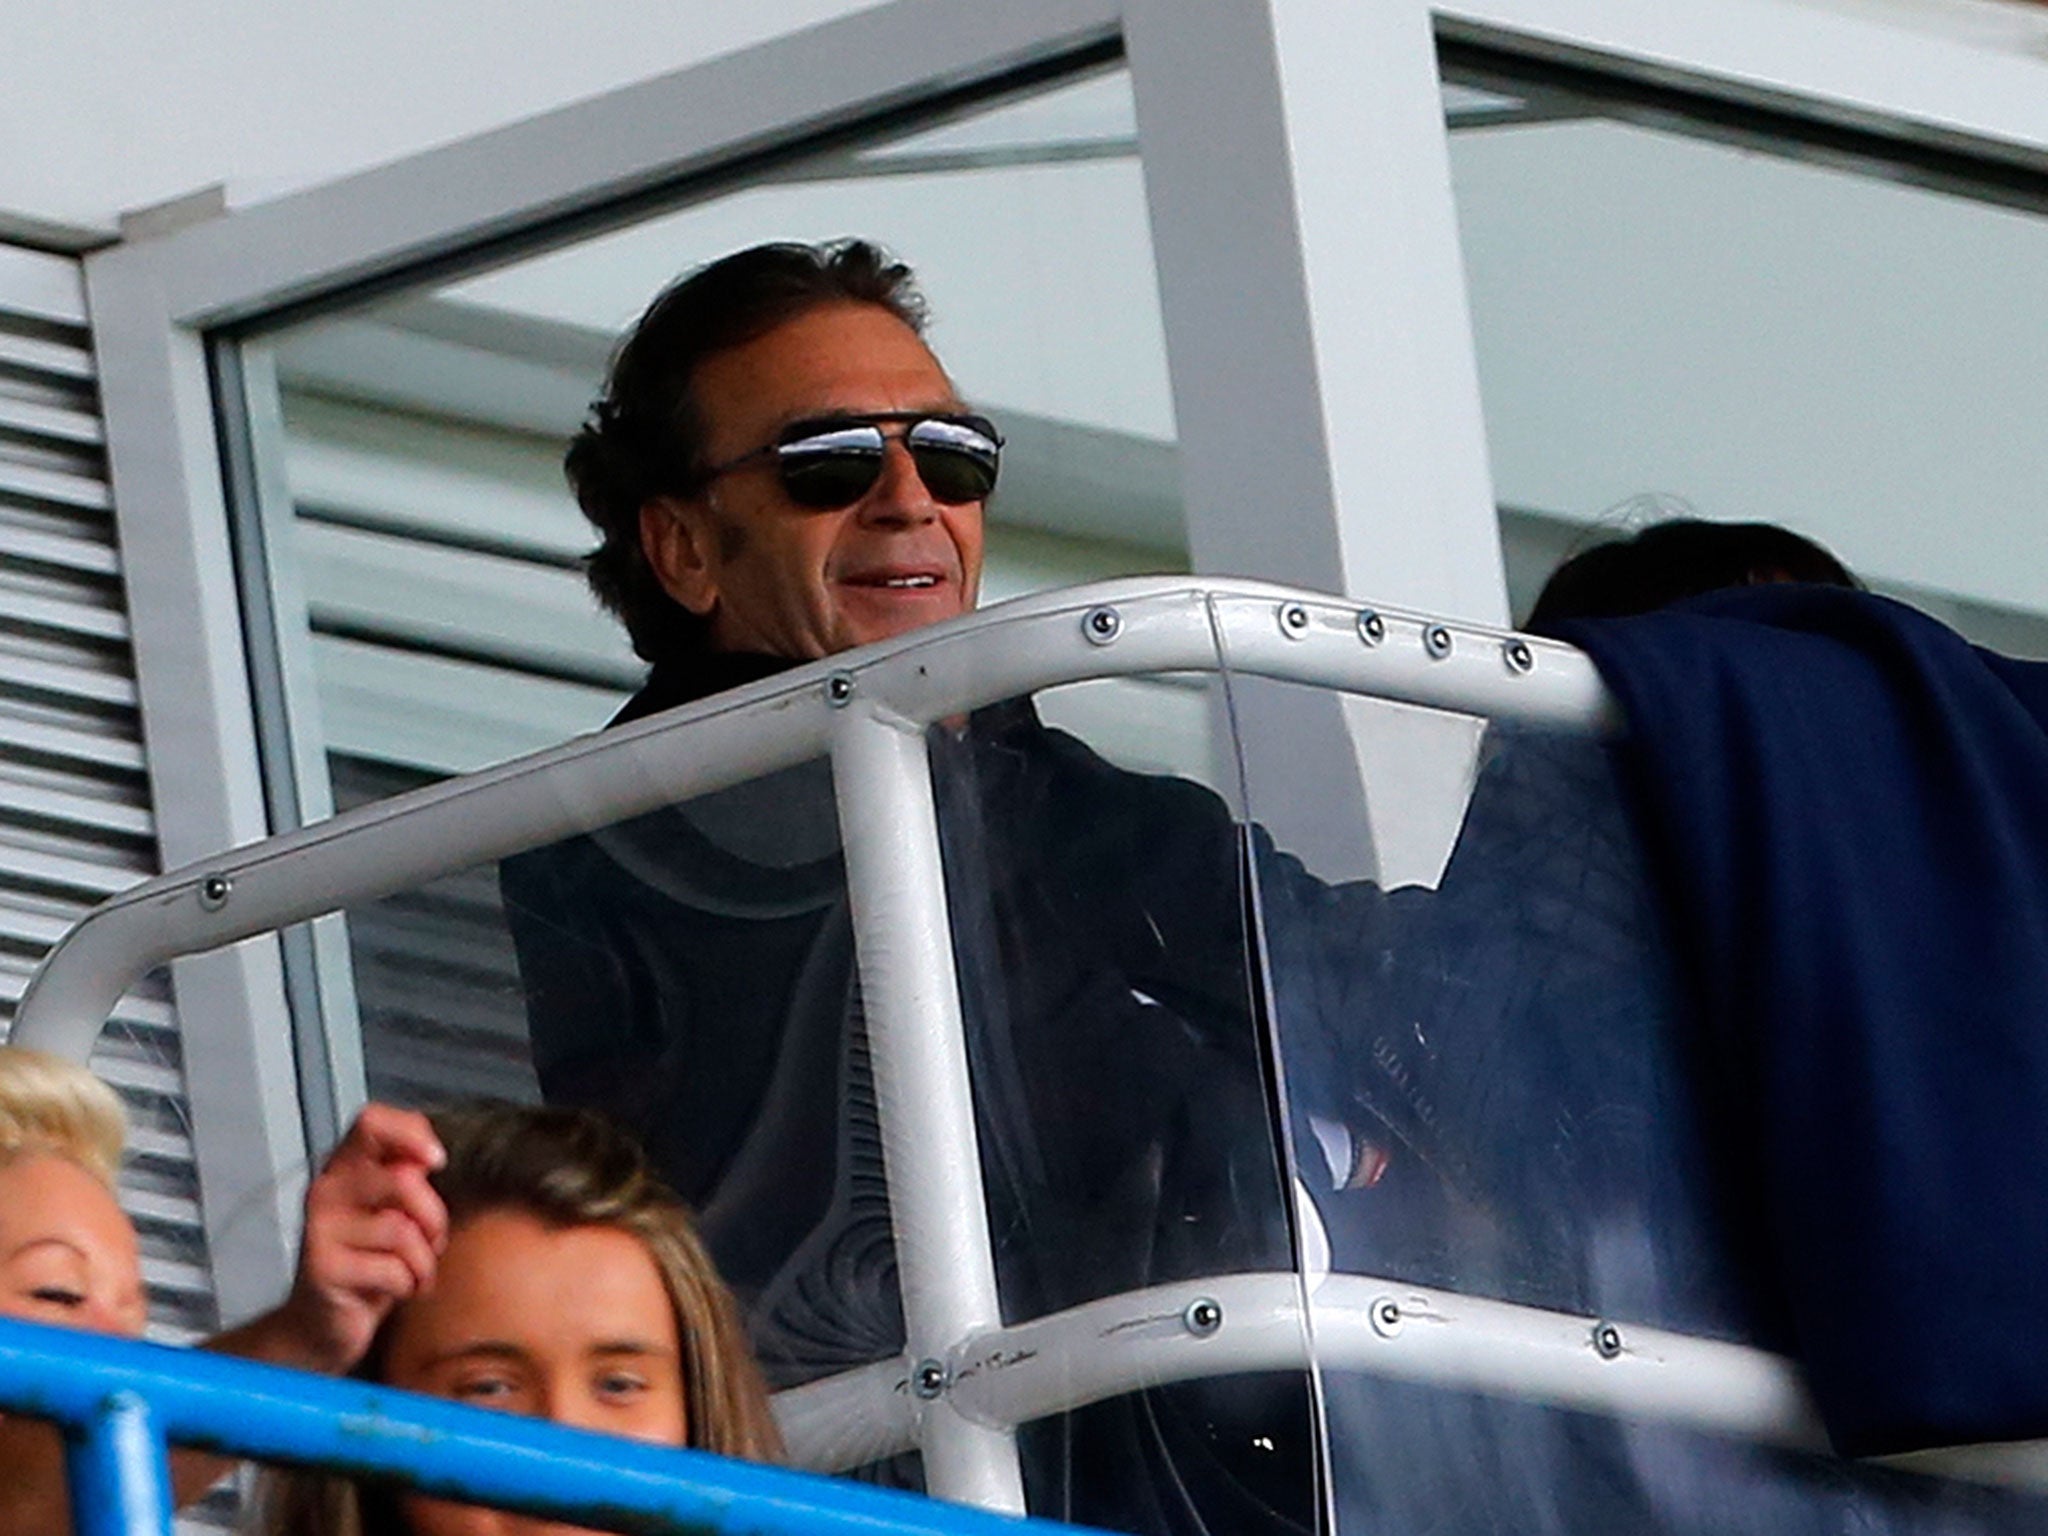 Leeds United owner Massimo Cellino looks on from the stands (Getty)